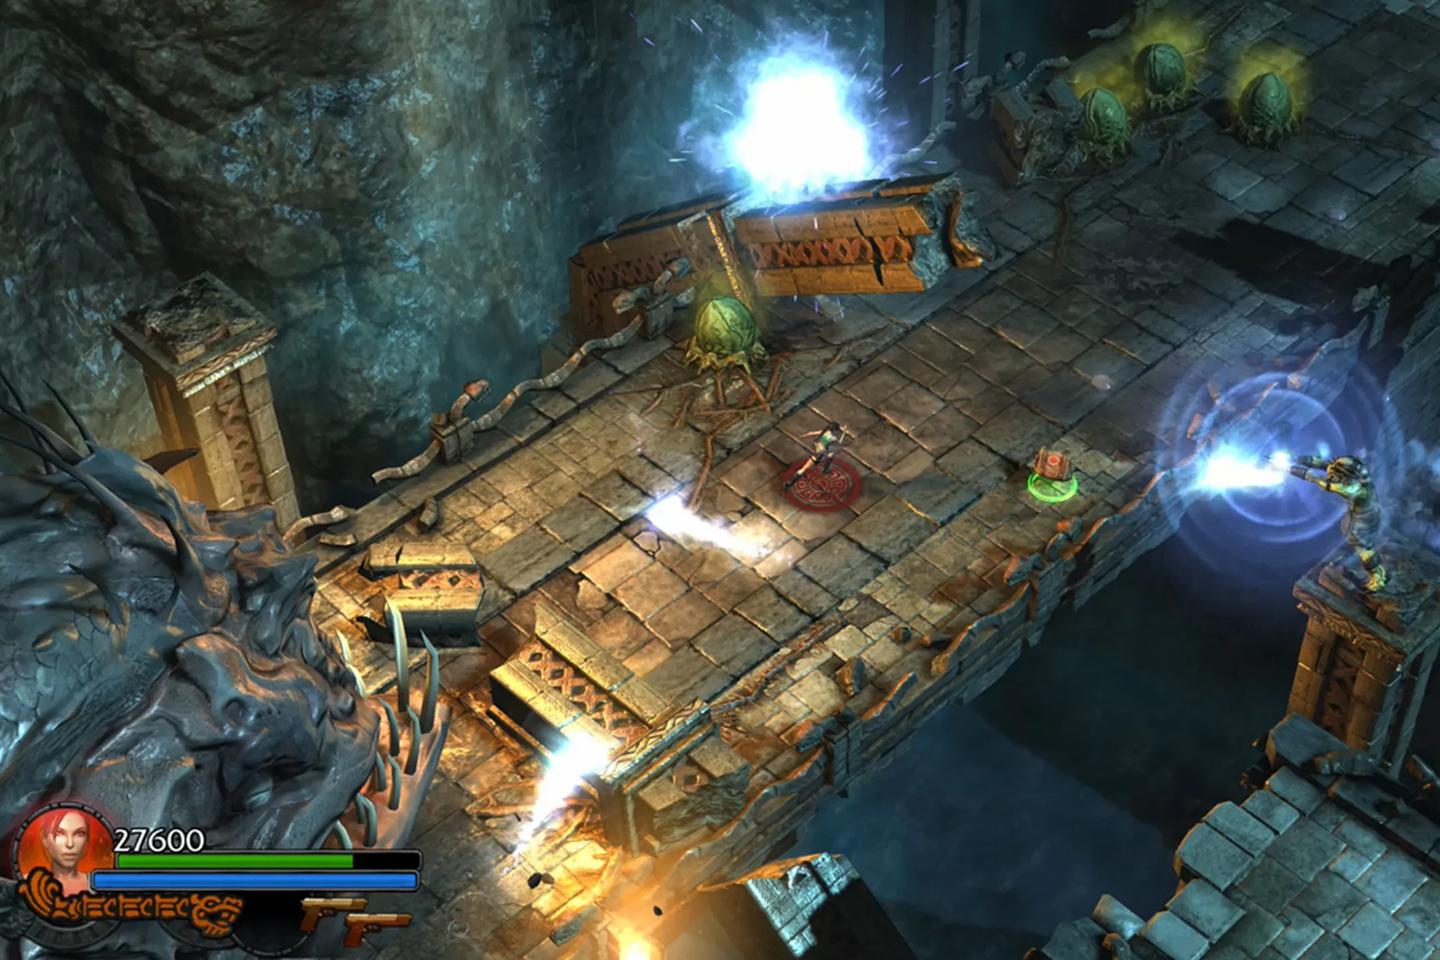 A screenshot from a Tomb Raider game showing characters engaged in combat on an ancient stone bridge over a deep chasm, with magical effects and artifacts surrounding the action.